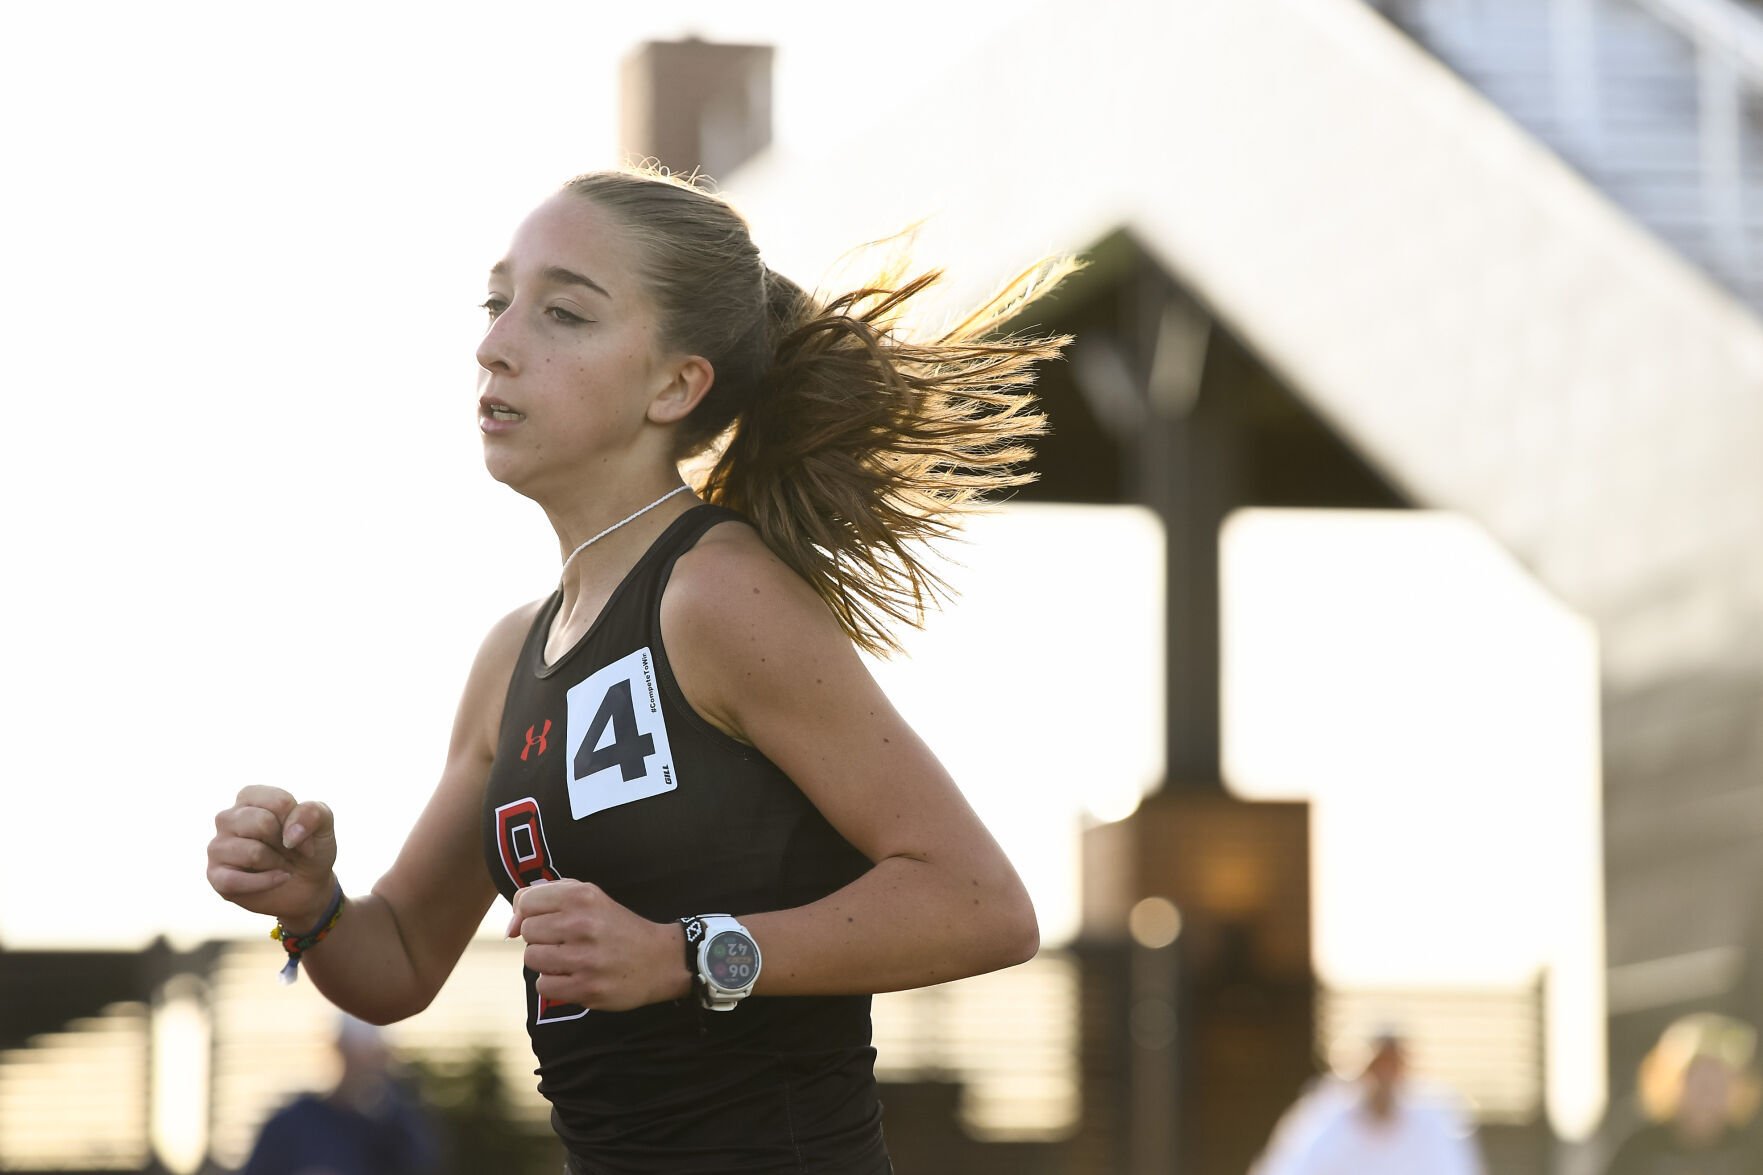 Local Stars Shine at Denton ISD Track Meets: Wingard, Westrom, and More Qualify for Regionals